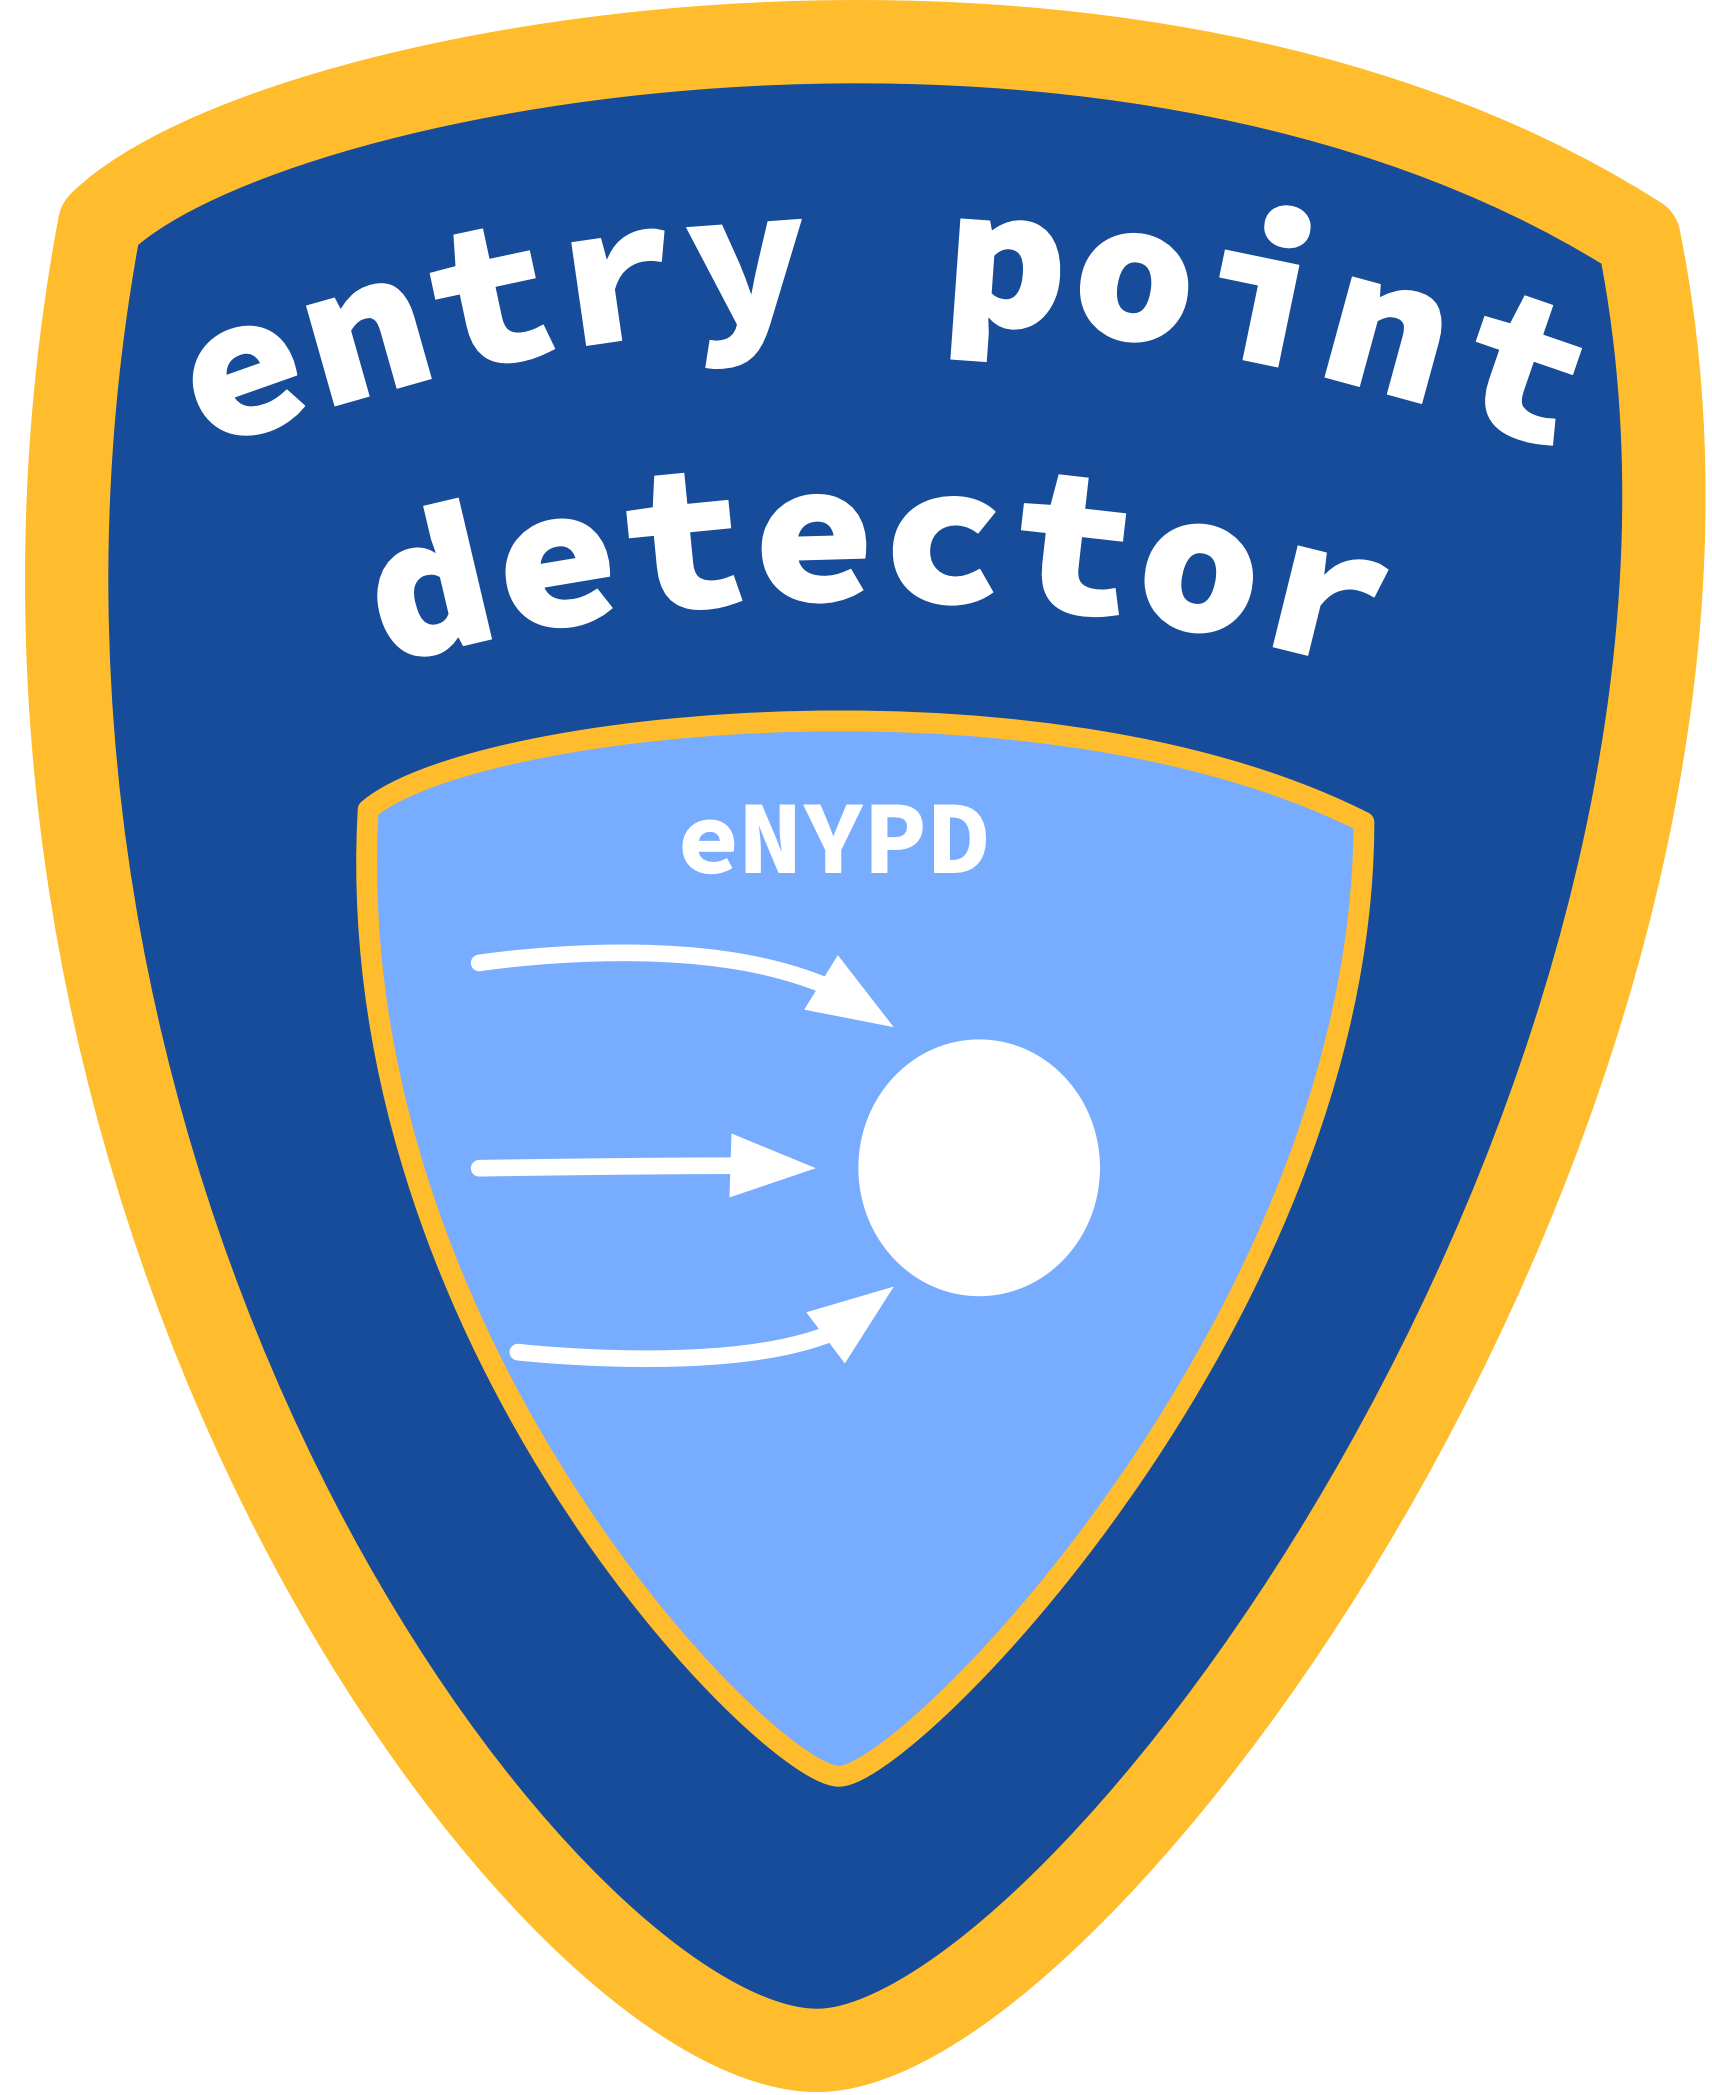 eNYPD